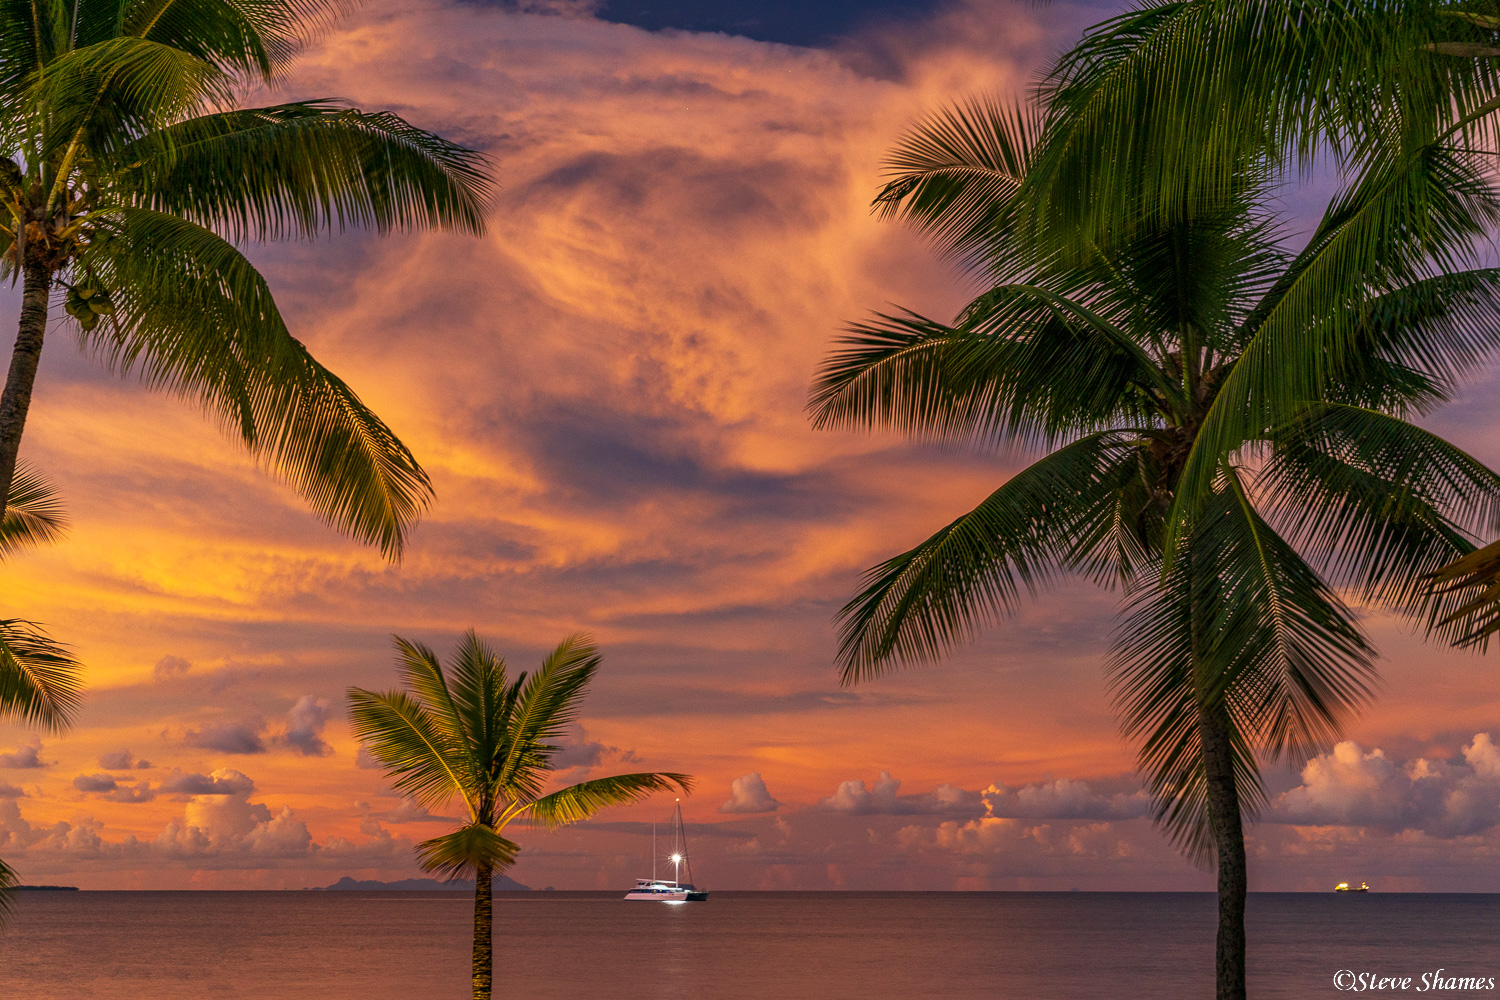 A boat out at sea makes a nice addition to this sunset scene in Fiji.